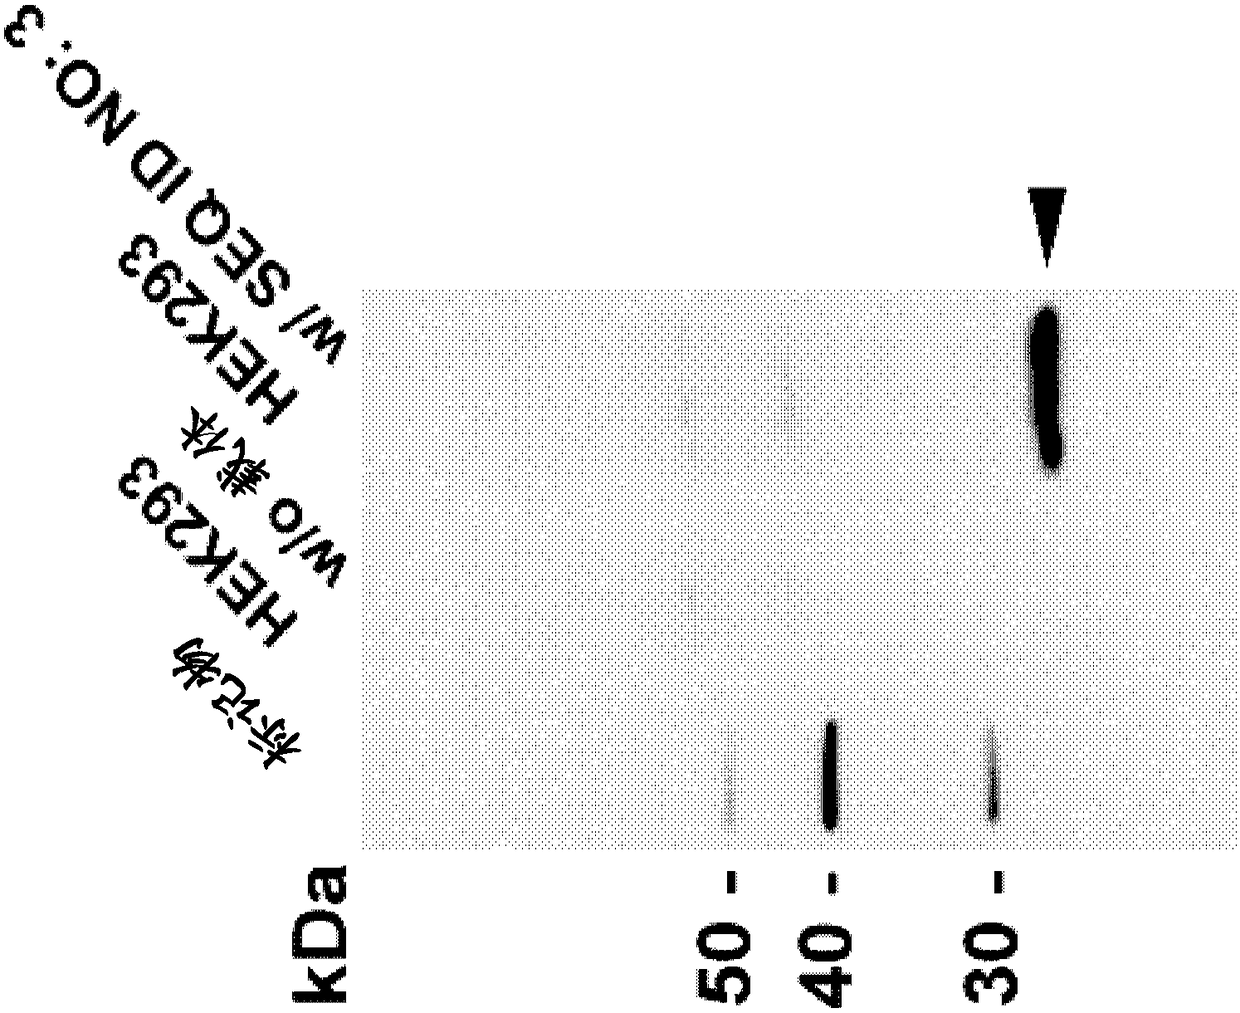 Monoclonal antibody against claudin-18 for the treatment of cancer